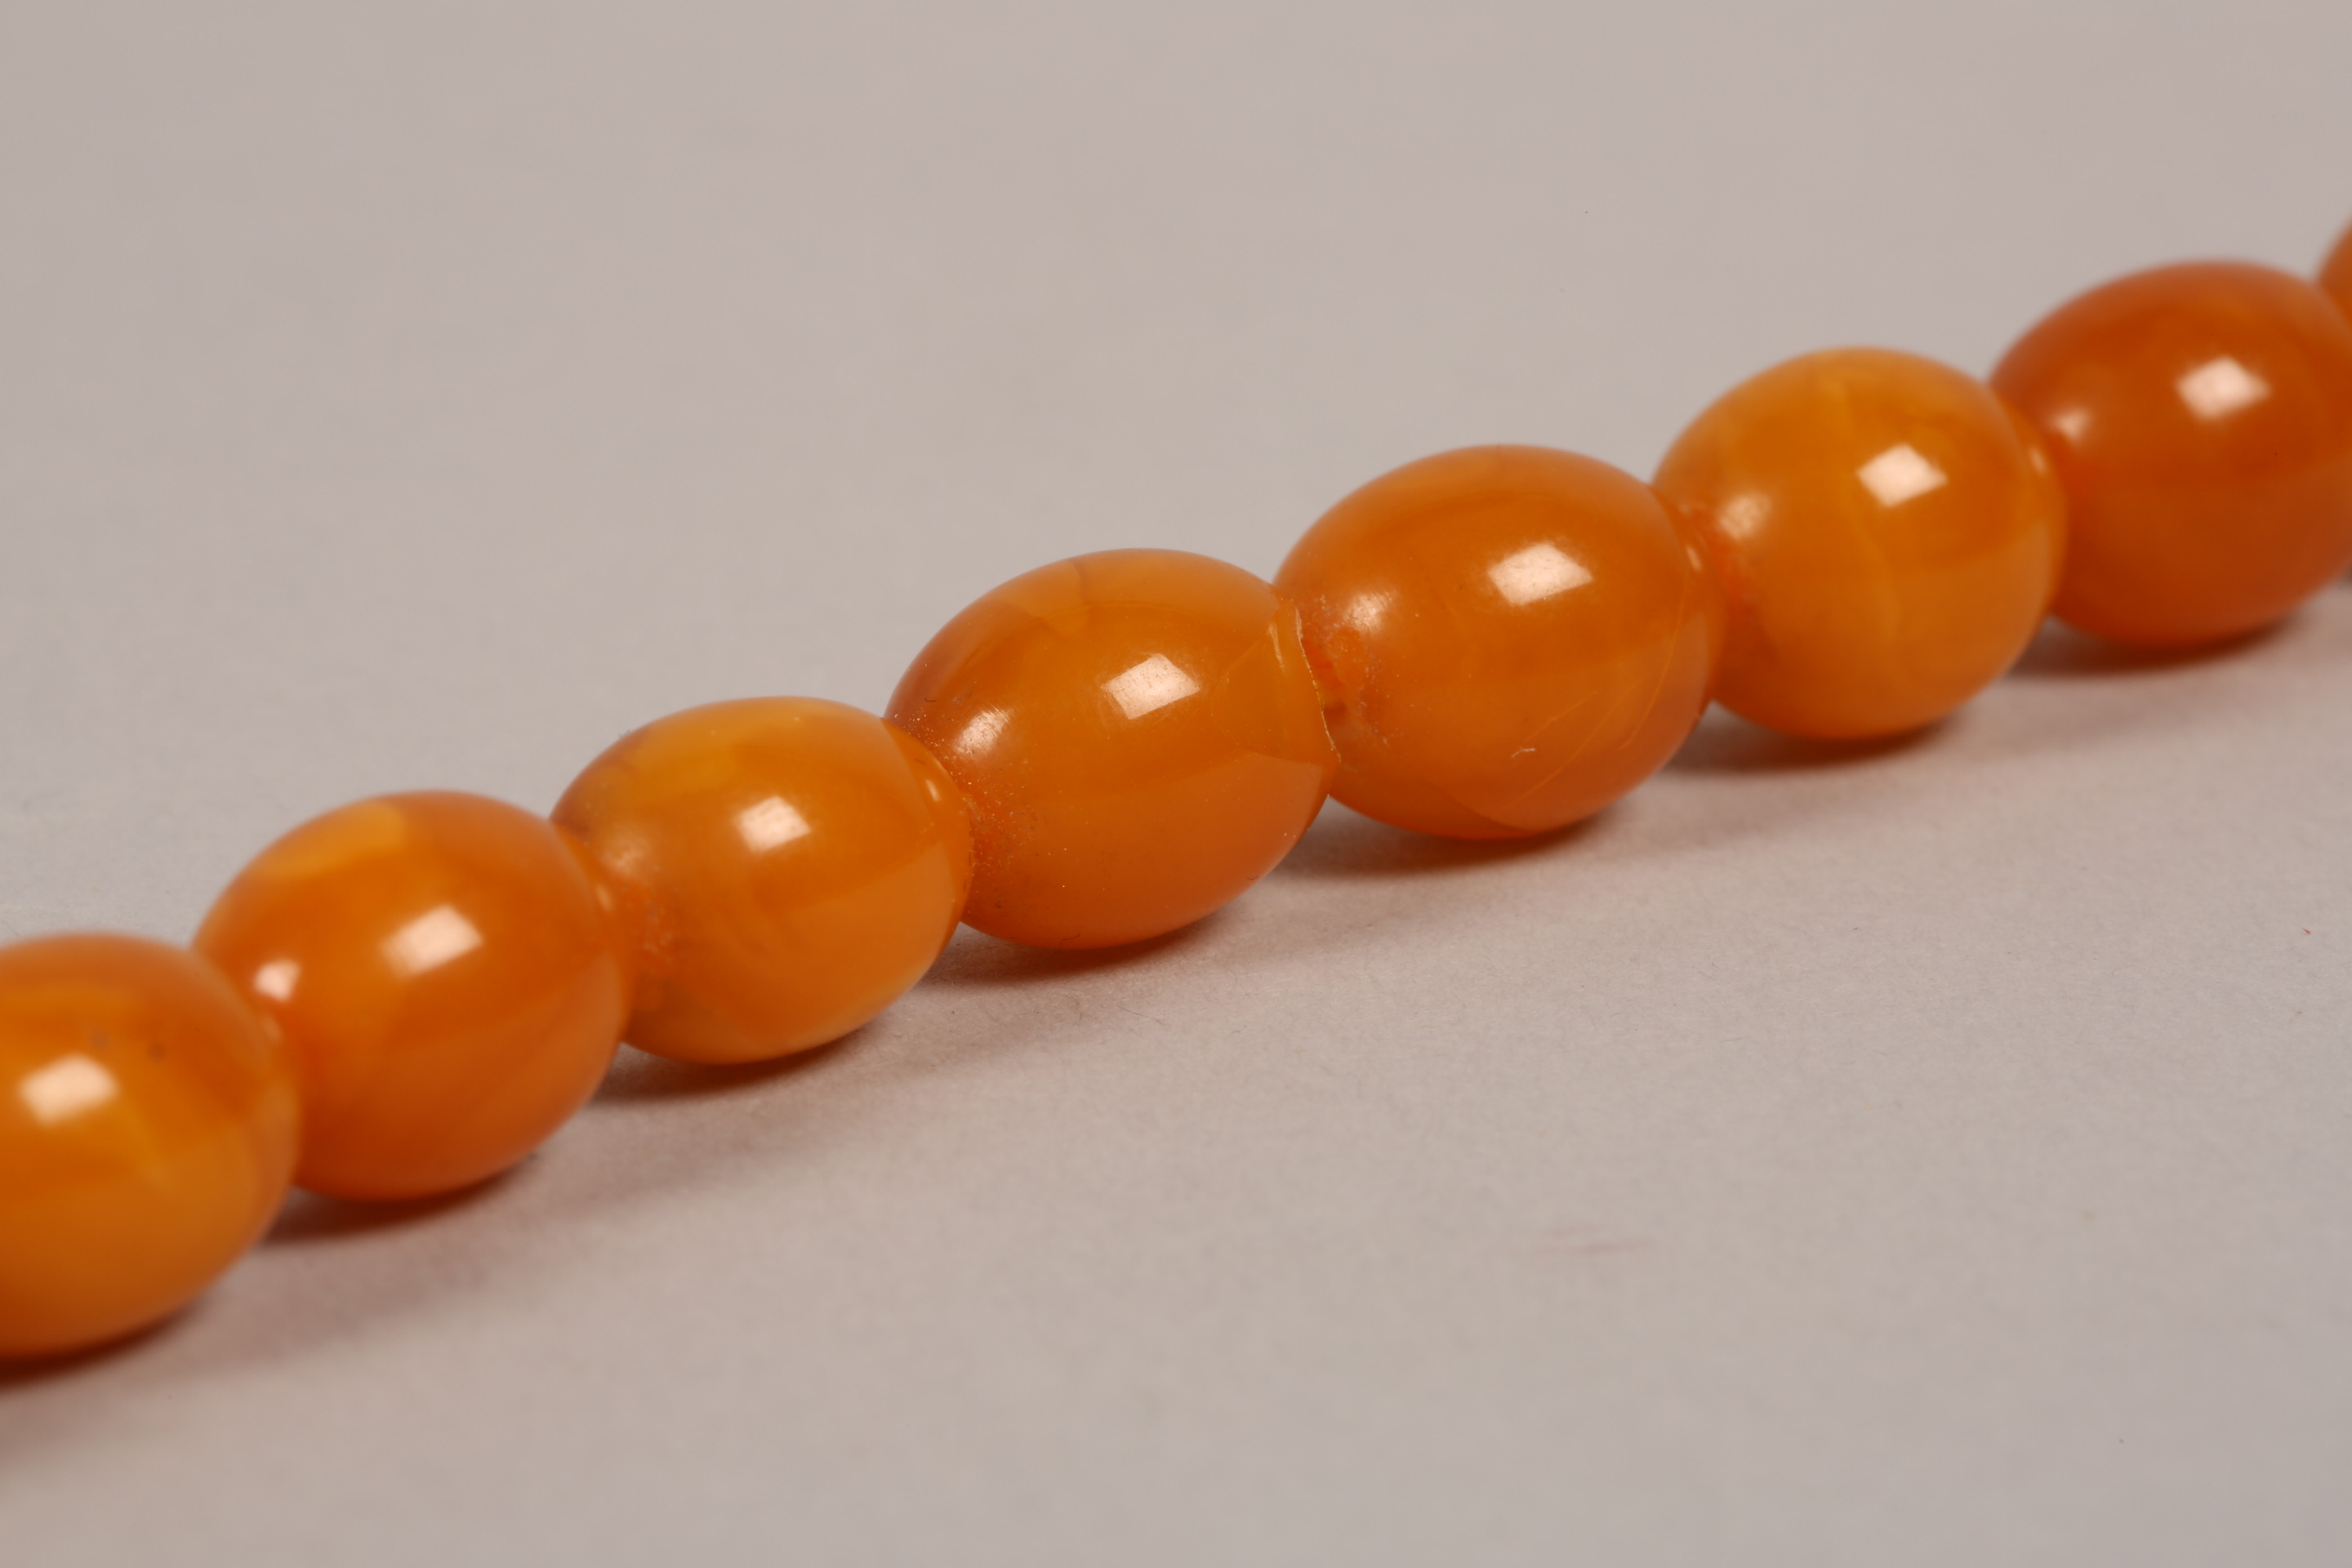 19th Century amber bead necklace (restrung) 69cm long, largest bead 20mm x 25mm. 53g - Image 7 of 7